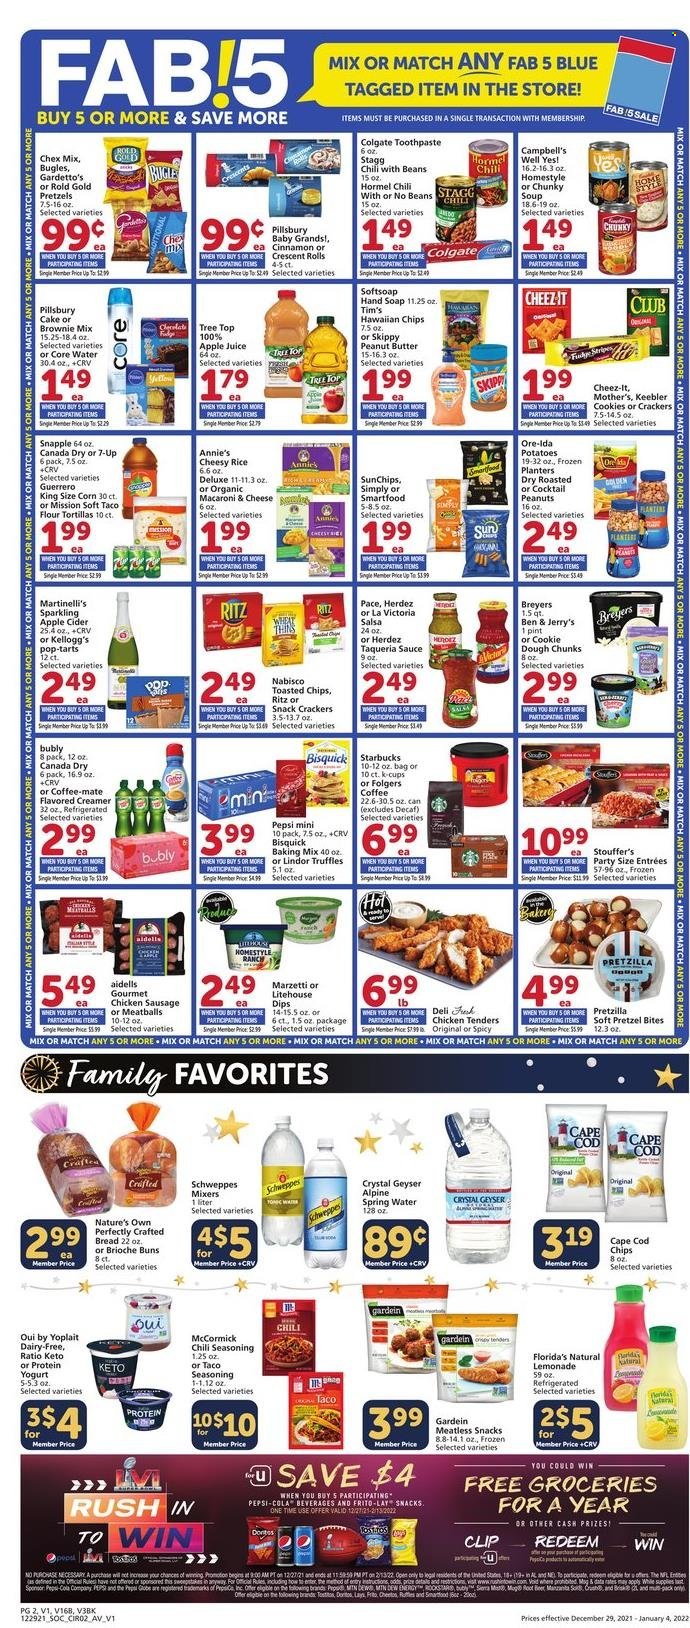 thumbnail - Albertsons Flyer - 12/29/2021 - 01/04/2022 - Sales products - bread, tortillas, pretzels, cake, buns, brioche, flour tortillas, crescent rolls, brownie mix, corn, potatoes, cod, Campbell's, macaroni & cheese, chicken tenders, meatballs, soup, sauce, Pillsbury, Annie's, Hormel, sausage, chicken sausage, yoghurt, Yoplait, Coffee-Mate, creamer, Ben & Jerry's, Stouffer's, Ore-Ida, cookie dough, cookies, snack, Lindor, truffles, crackers, Kellogg's, Pop-Tarts, Florida's Natural, Keebler, RITZ, Doritos, Smartfood, Thins, Cheez-It, Chex Mix, Bisquick, rice, spice, cinnamon, salsa, peanut butter, peanuts, Planters, apple juice, Canada Dry, lemonade, Schweppes, Pepsi, juice, 7UP, Snapple, spring water, Starbucks, Folgers, coffee capsules, K-Cups, apple cider, cider, beer, Softsoap, hand soap, soap, Colgate, toothpaste, Nature's Own. Page 2.